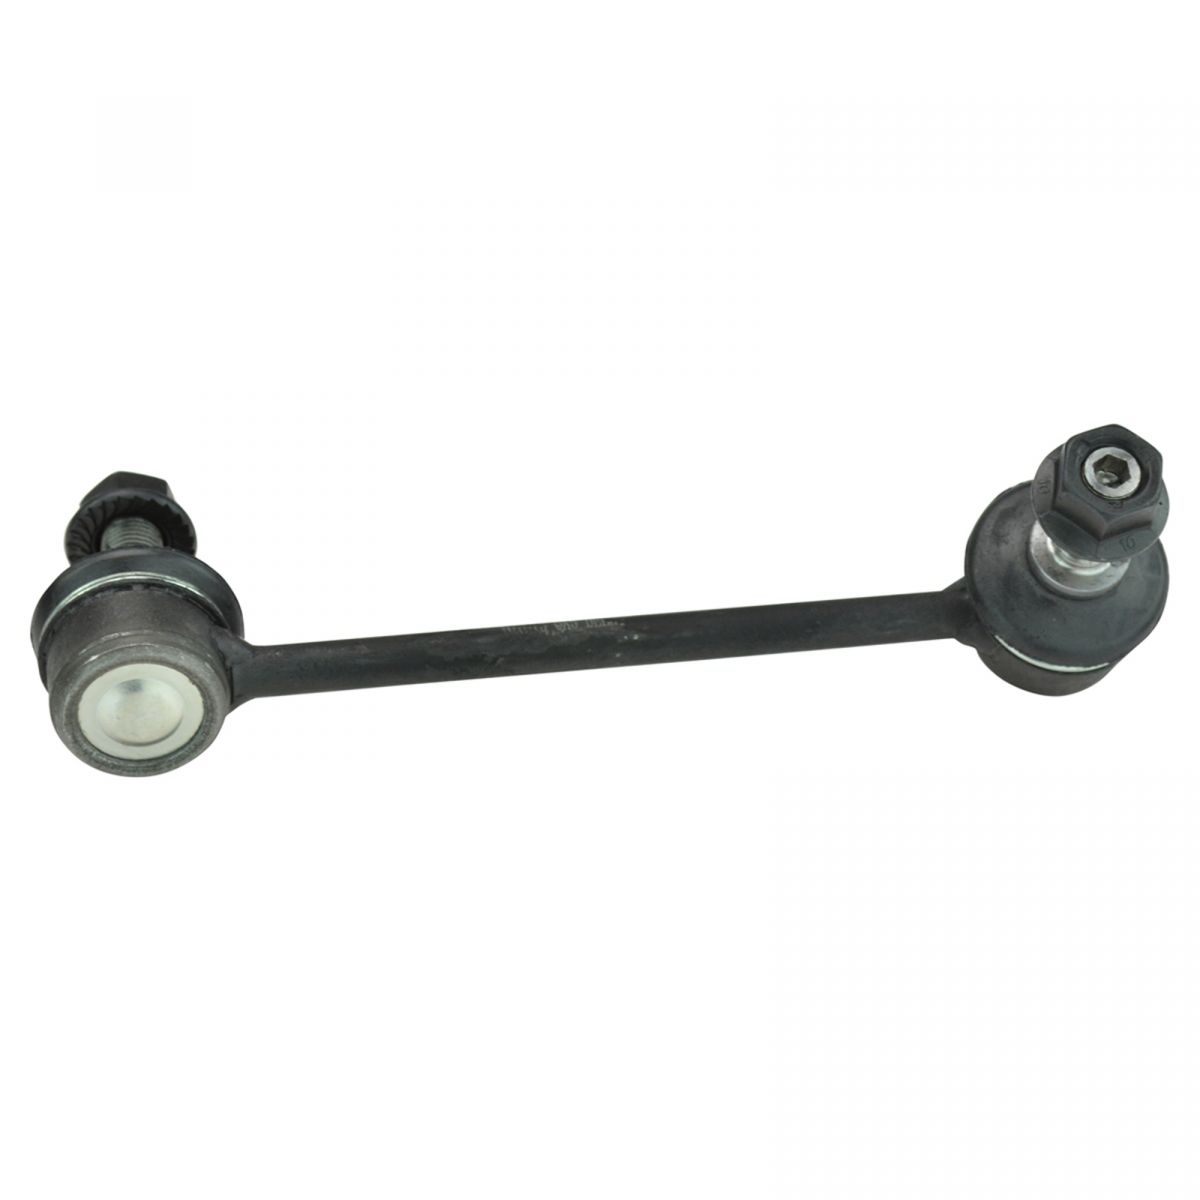 Acura Mdx Sway Bar Link Replacement Cost